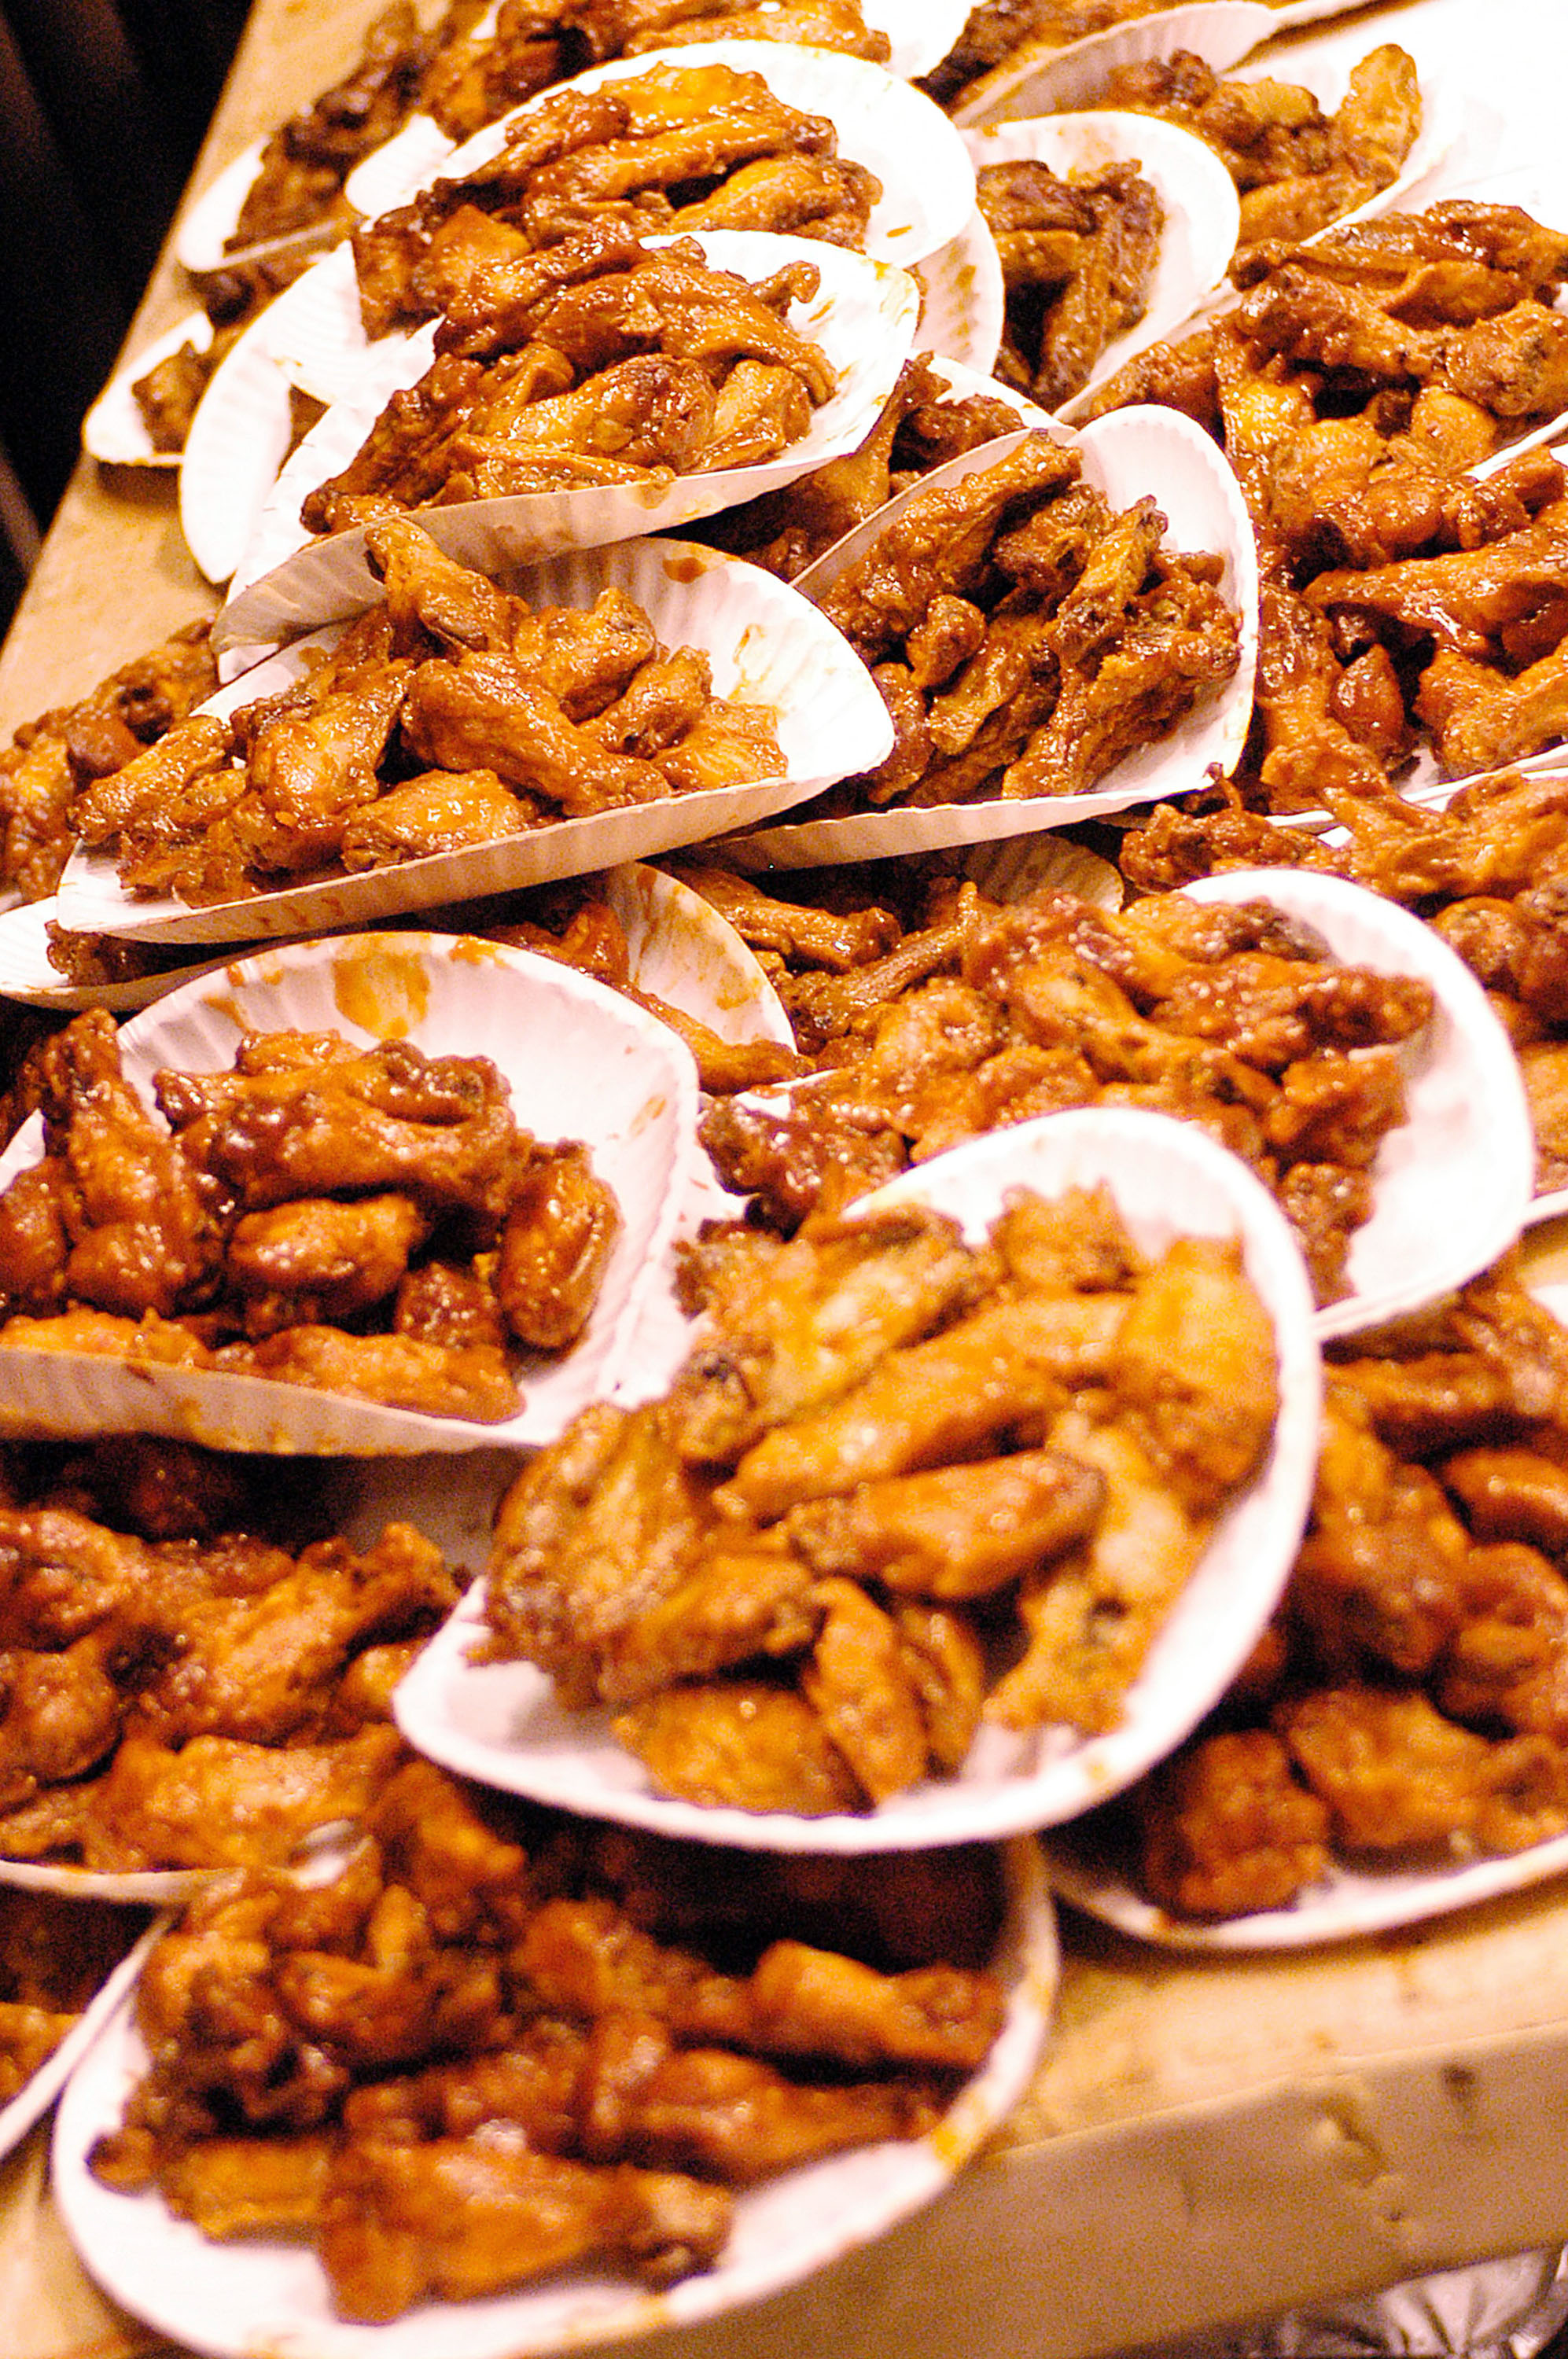 A pile of chicken wings